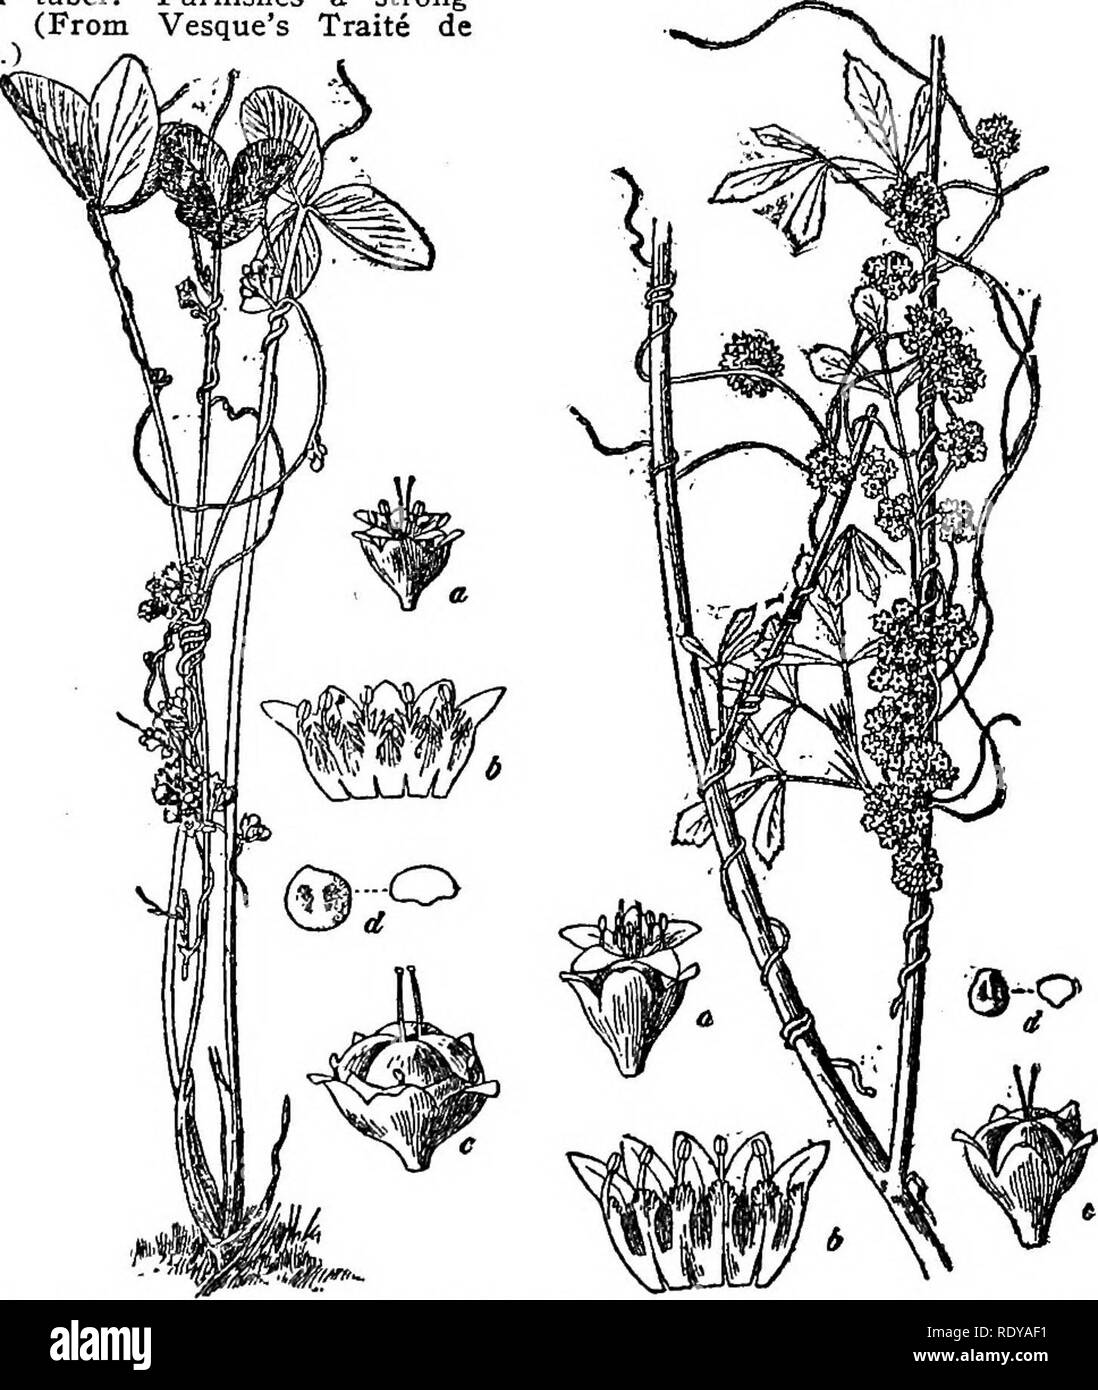 . A manual of poisonous plants, chiefly of eastern North America, with brief notes on economic and medicinal plants, and numerous illustrations. Poisonous plants. Fig. 402. Jalap (Ipomoea Purga). Plant and tuber. Furnishes a strong purgative. (From Vesque's Traits de Botanique.) Fig. 403. Man-of-the- Earth ilpomoea fastigia- ta.) Used by the Indians as food. (Millspaugh Selby.). Pig. 404. Dodder. To the left—Field dodder (Cvsmta arvensis), a, flower; b, fiower spread apart; c, capsule with stamens and styles; d, seed. To the right—^Alfalfa dodder (C. epithymum), a, flower; b, flower spread apa Stock Photo